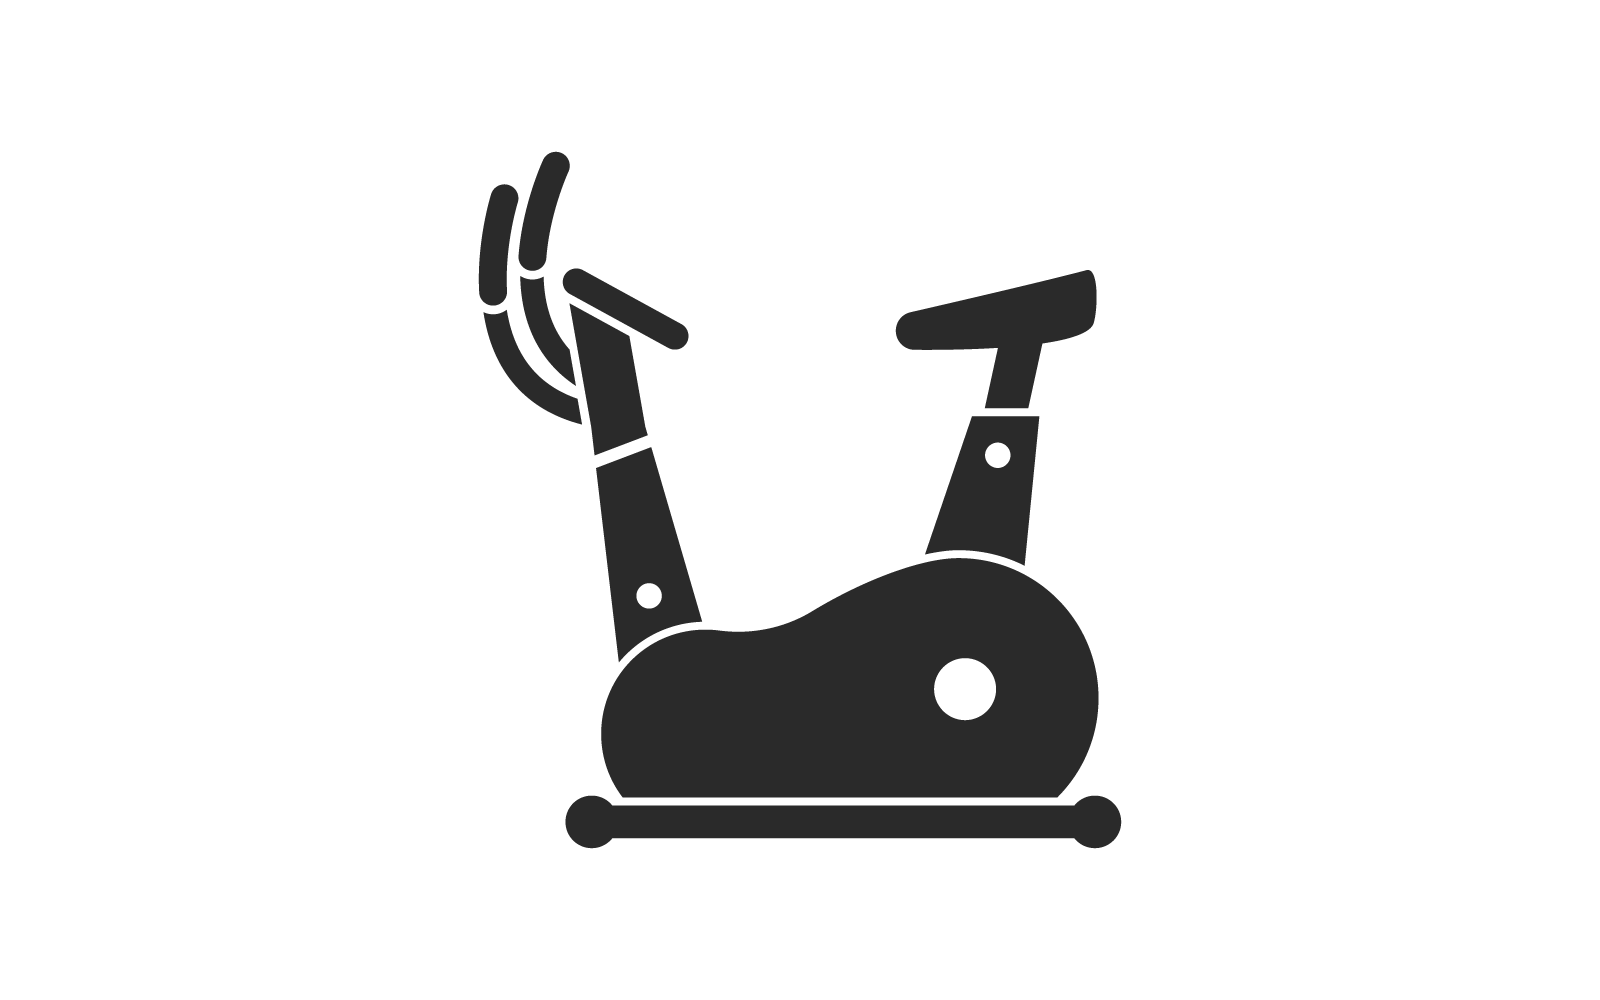 Exercise bicycle fitness icon flat design illustration template